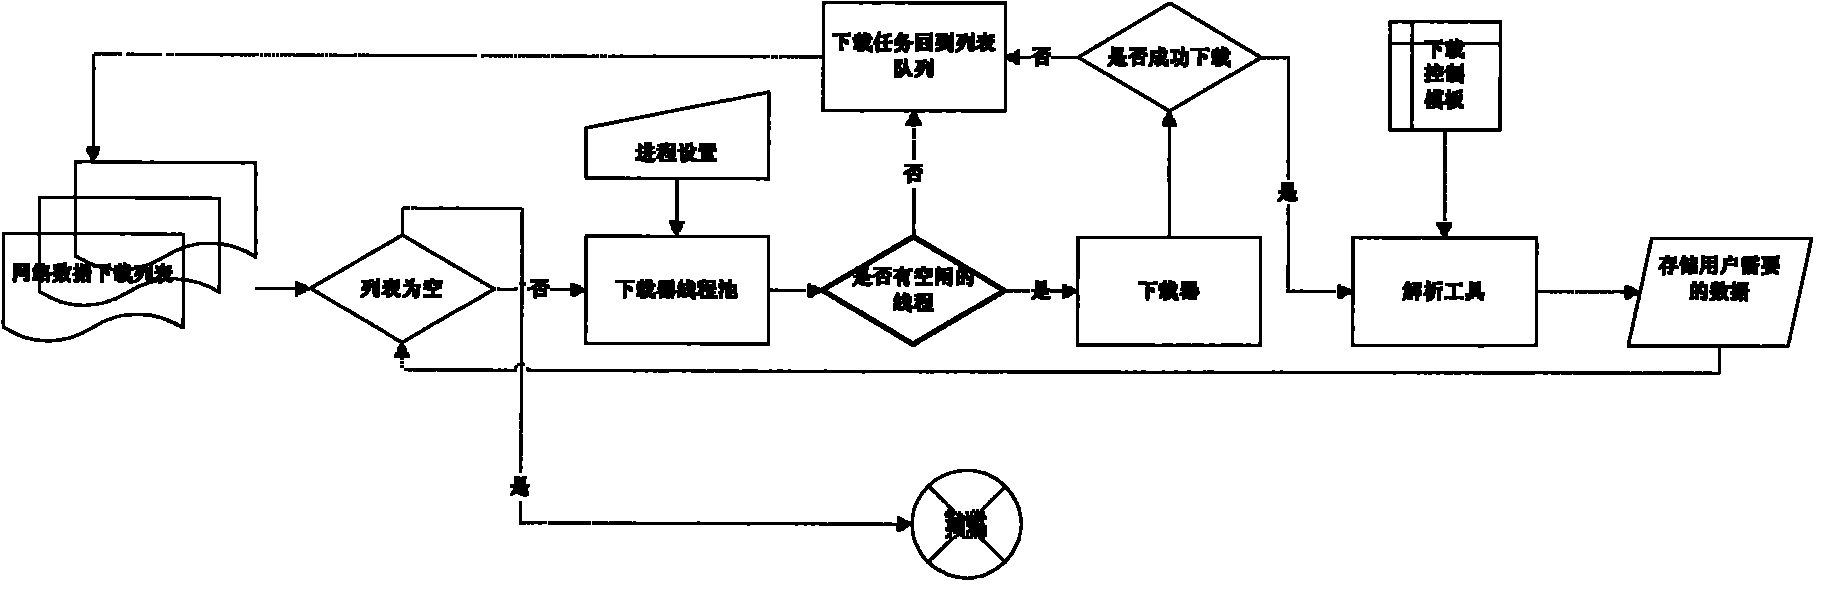 Data collecting method and system based on HTML stream processing